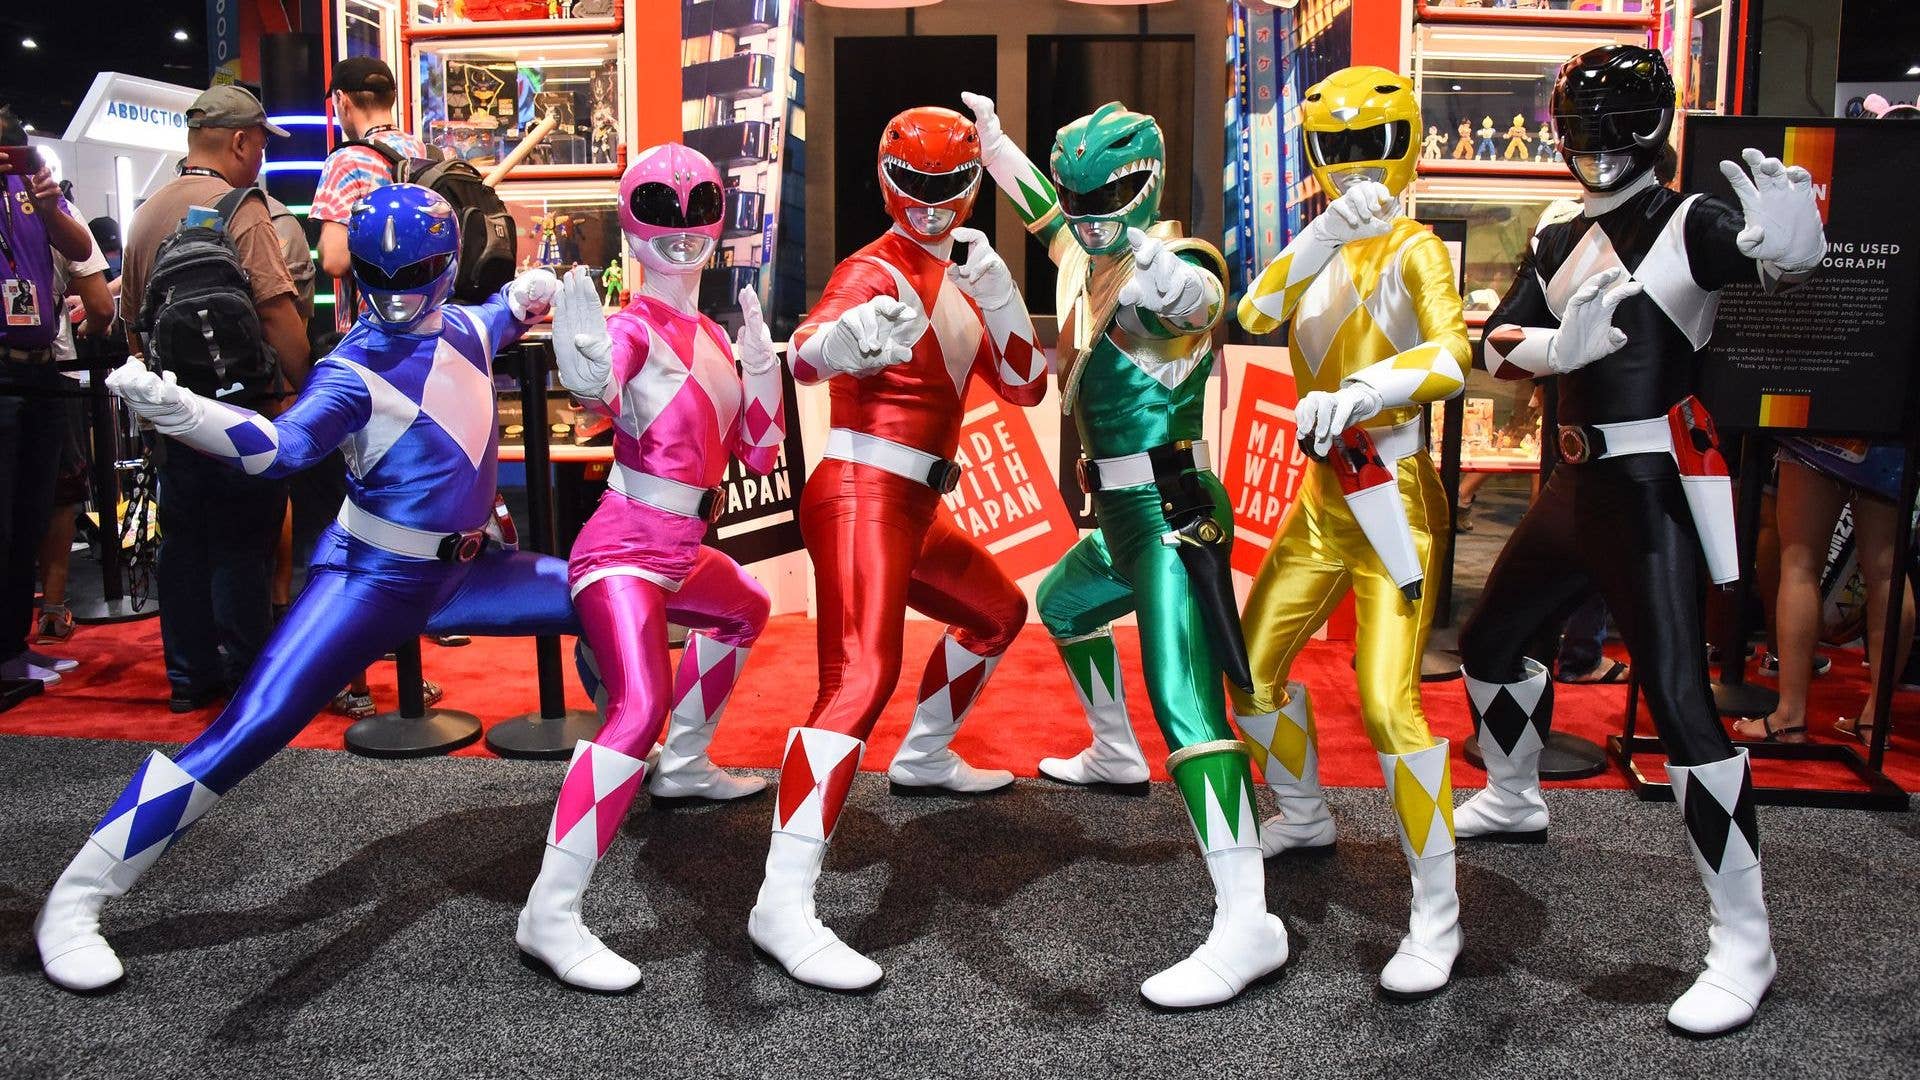 Power Rangers pose at the 2017 San Diego Comic Con